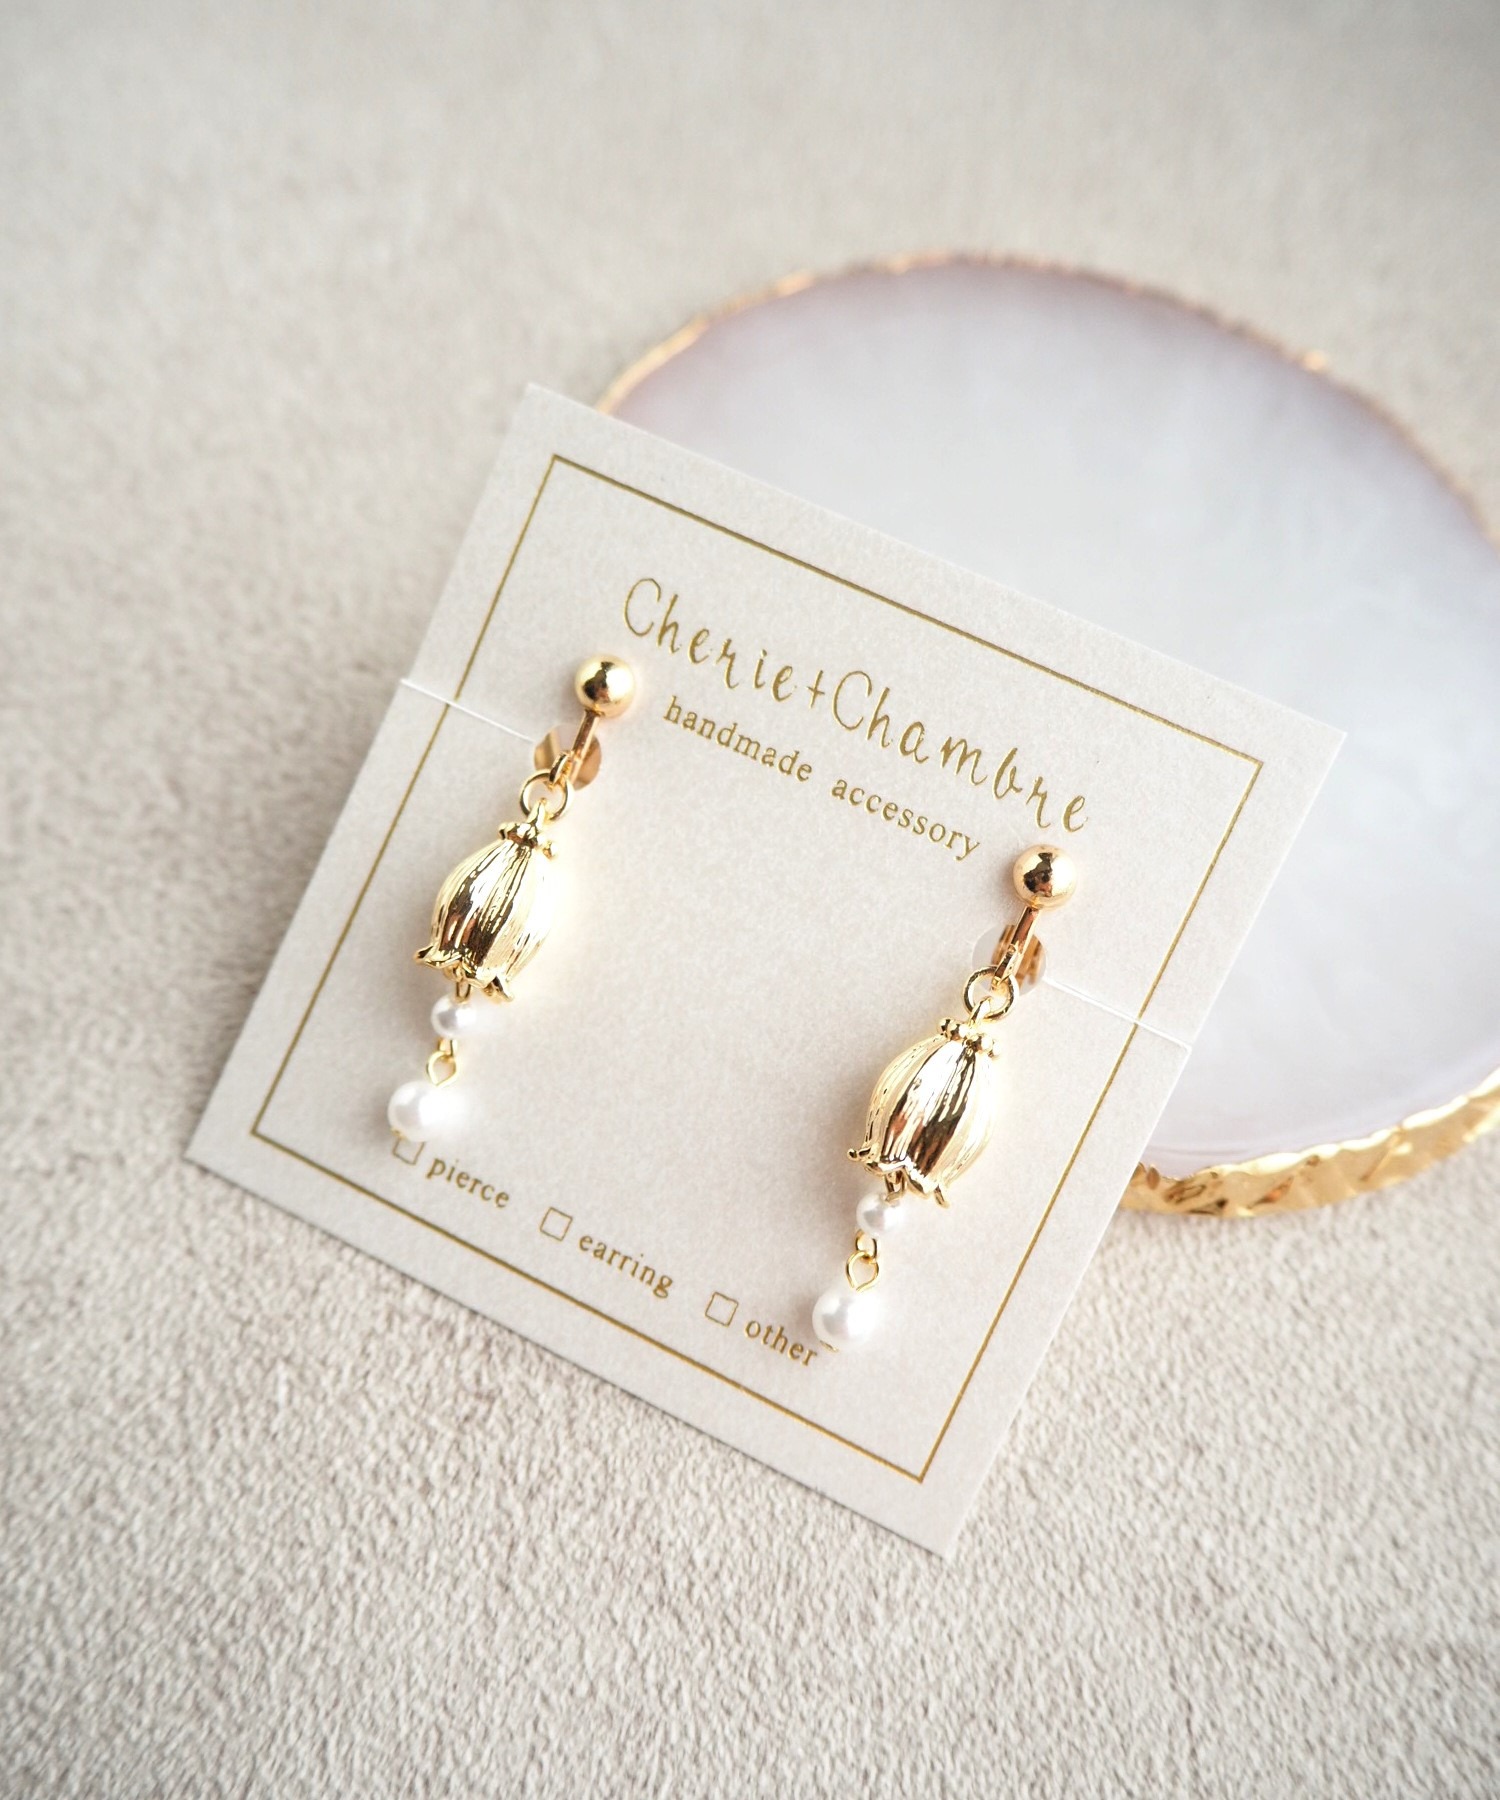 tone【Cherie+Chambre】Lily of the valley Earring